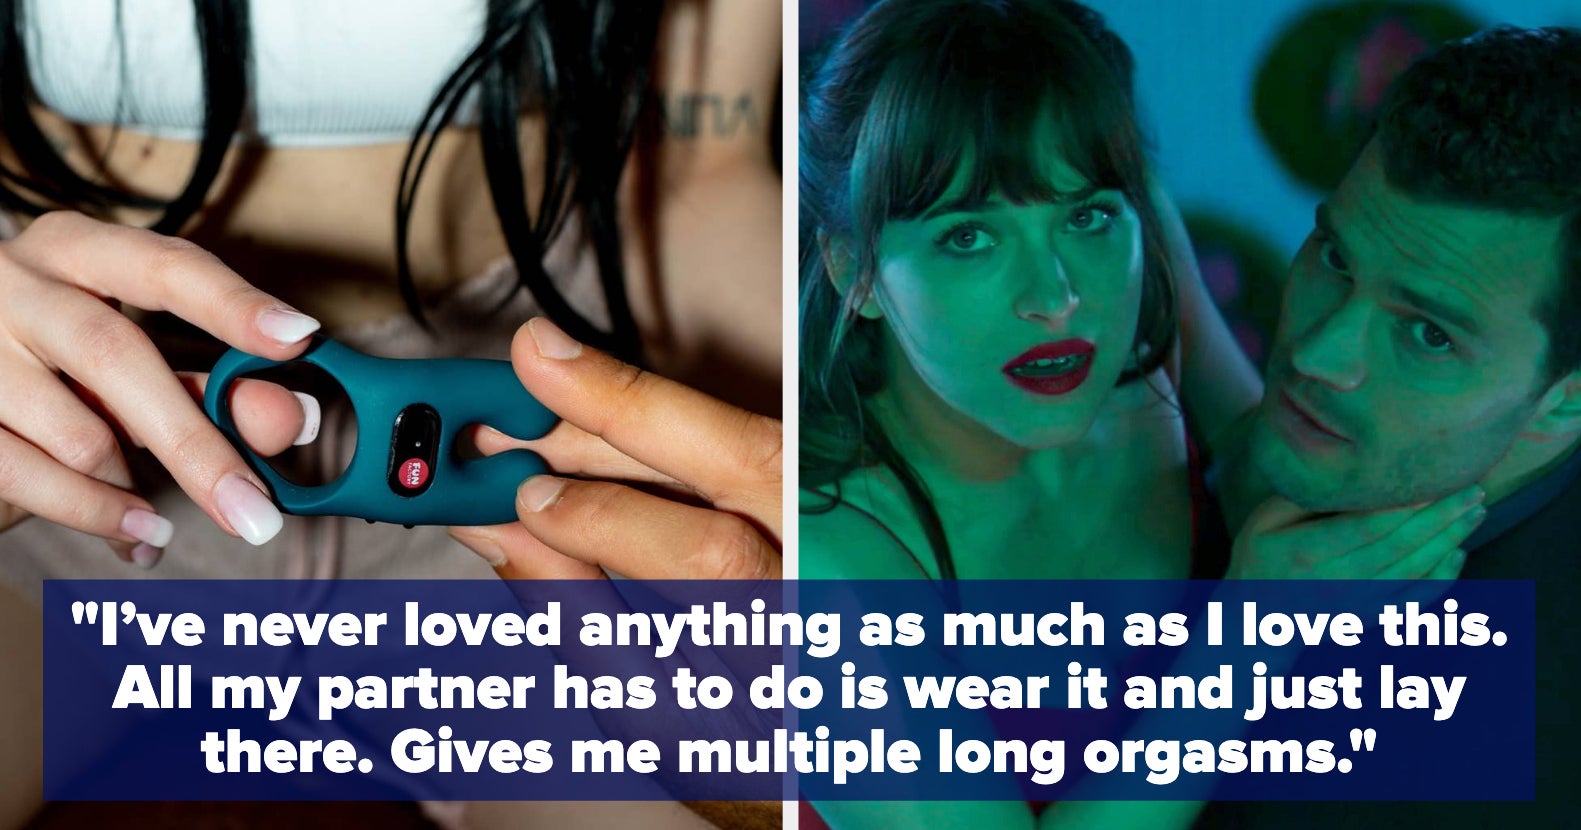 34 Sex Toys And Accessories To Blow Your Partner S Mind